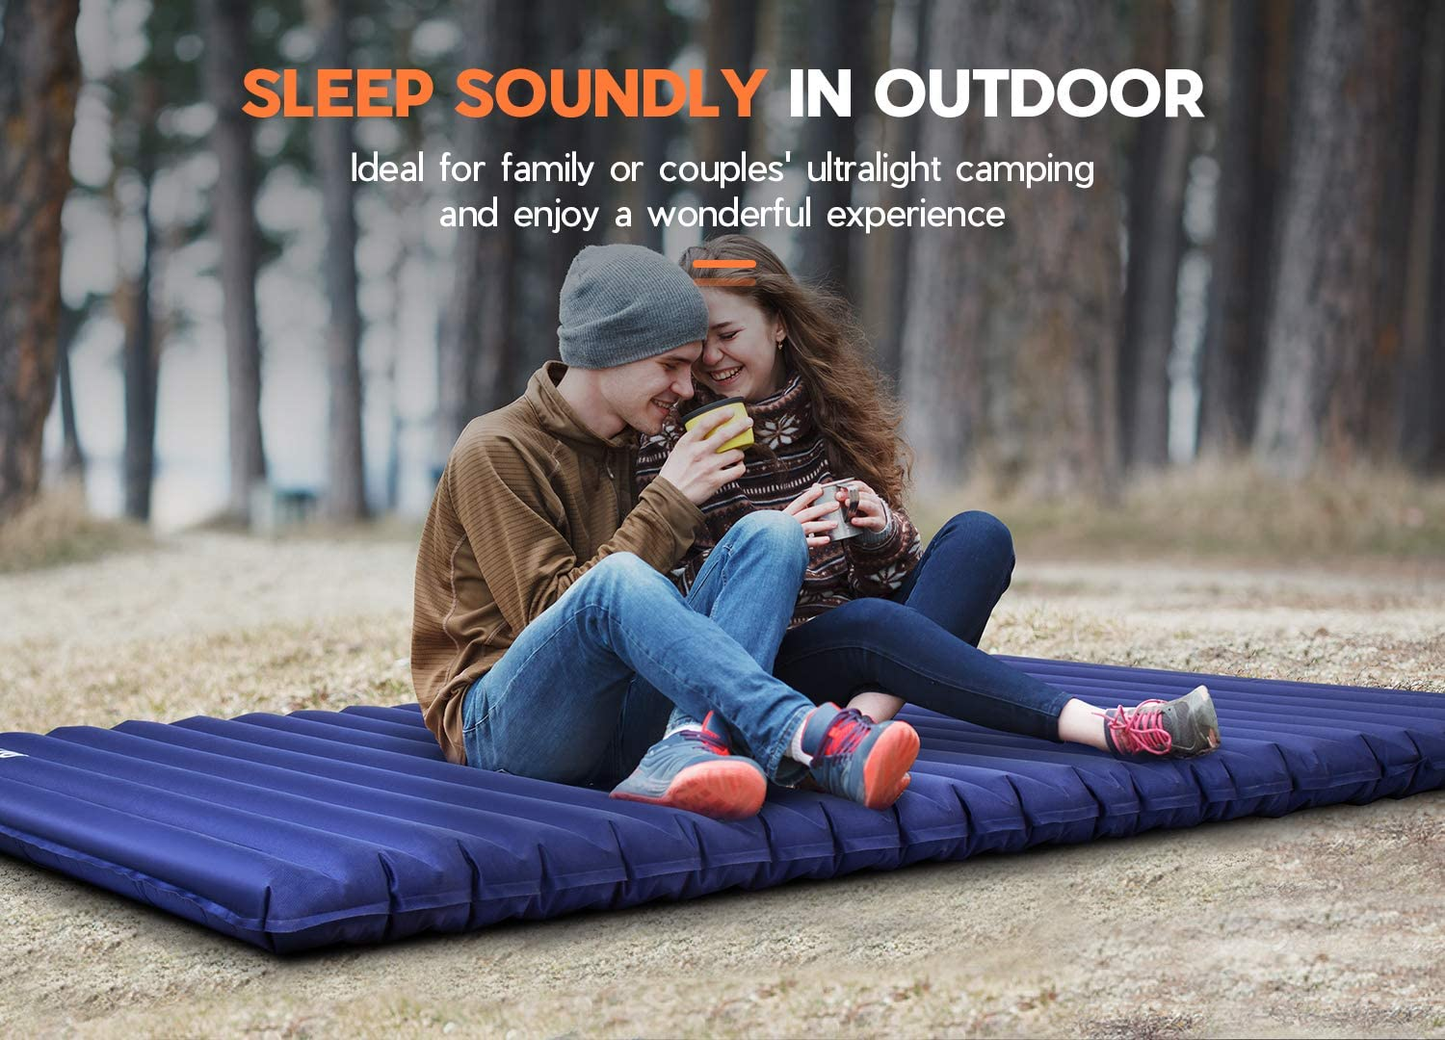 Double Sleeping Pad, Camping Mattress 2 Person,Extra Thick 3.75" Queen Camping Pads Tent Mattress for Adults,Backpacking,Car Camping,Hiking,Cot,Truck (Foot Pump)